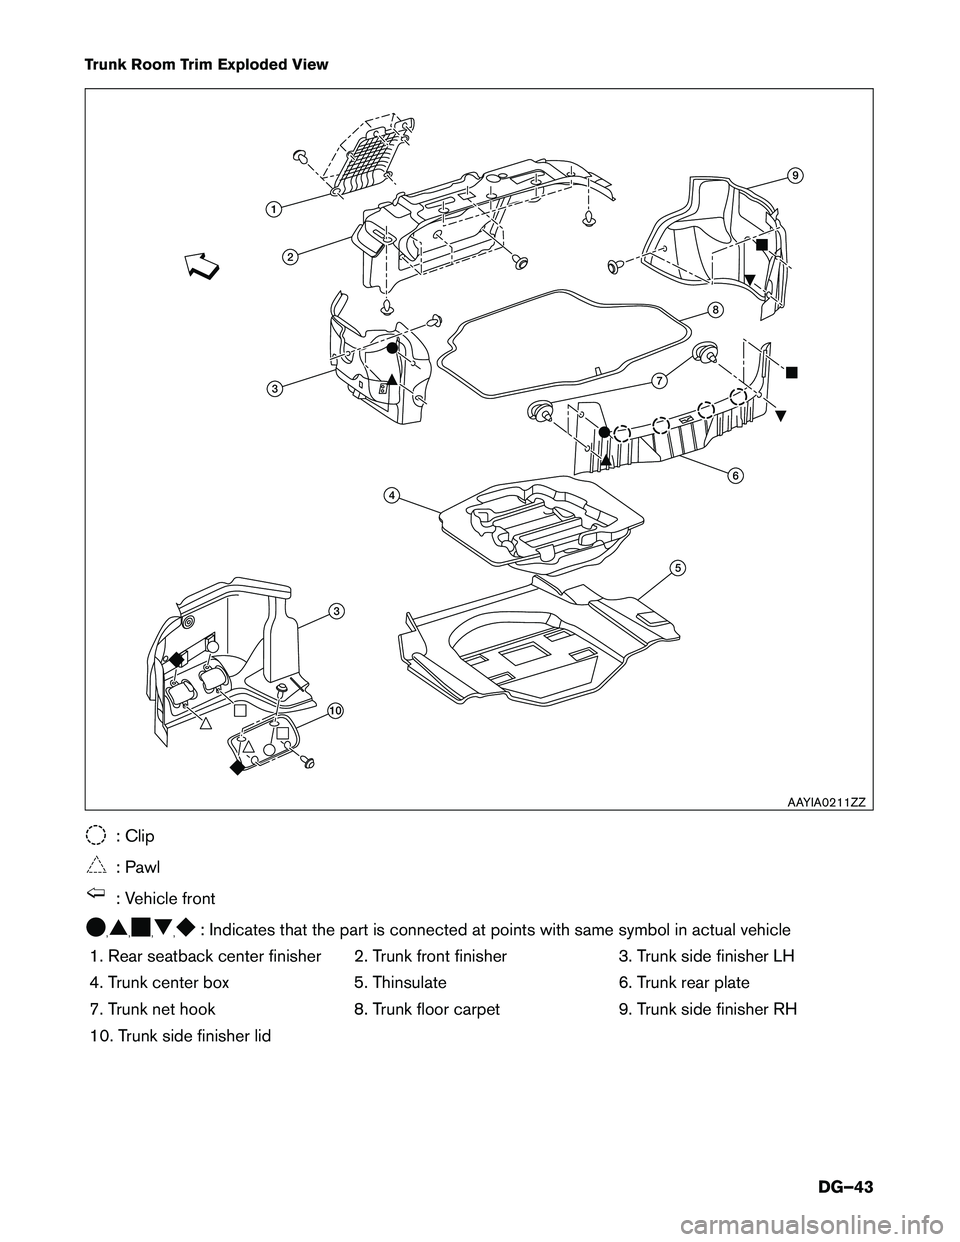 INFINITI Q50 HYBRID 2016  Dismantling Guide Trunk Room Trim Exploded View
: Clip
: Pawl
: Vehicle front
, , , ,
: Indicates that the part is connected at points with same symbol in actual vehicle
1.
Rear seatback center finisher 2. Trunk front 